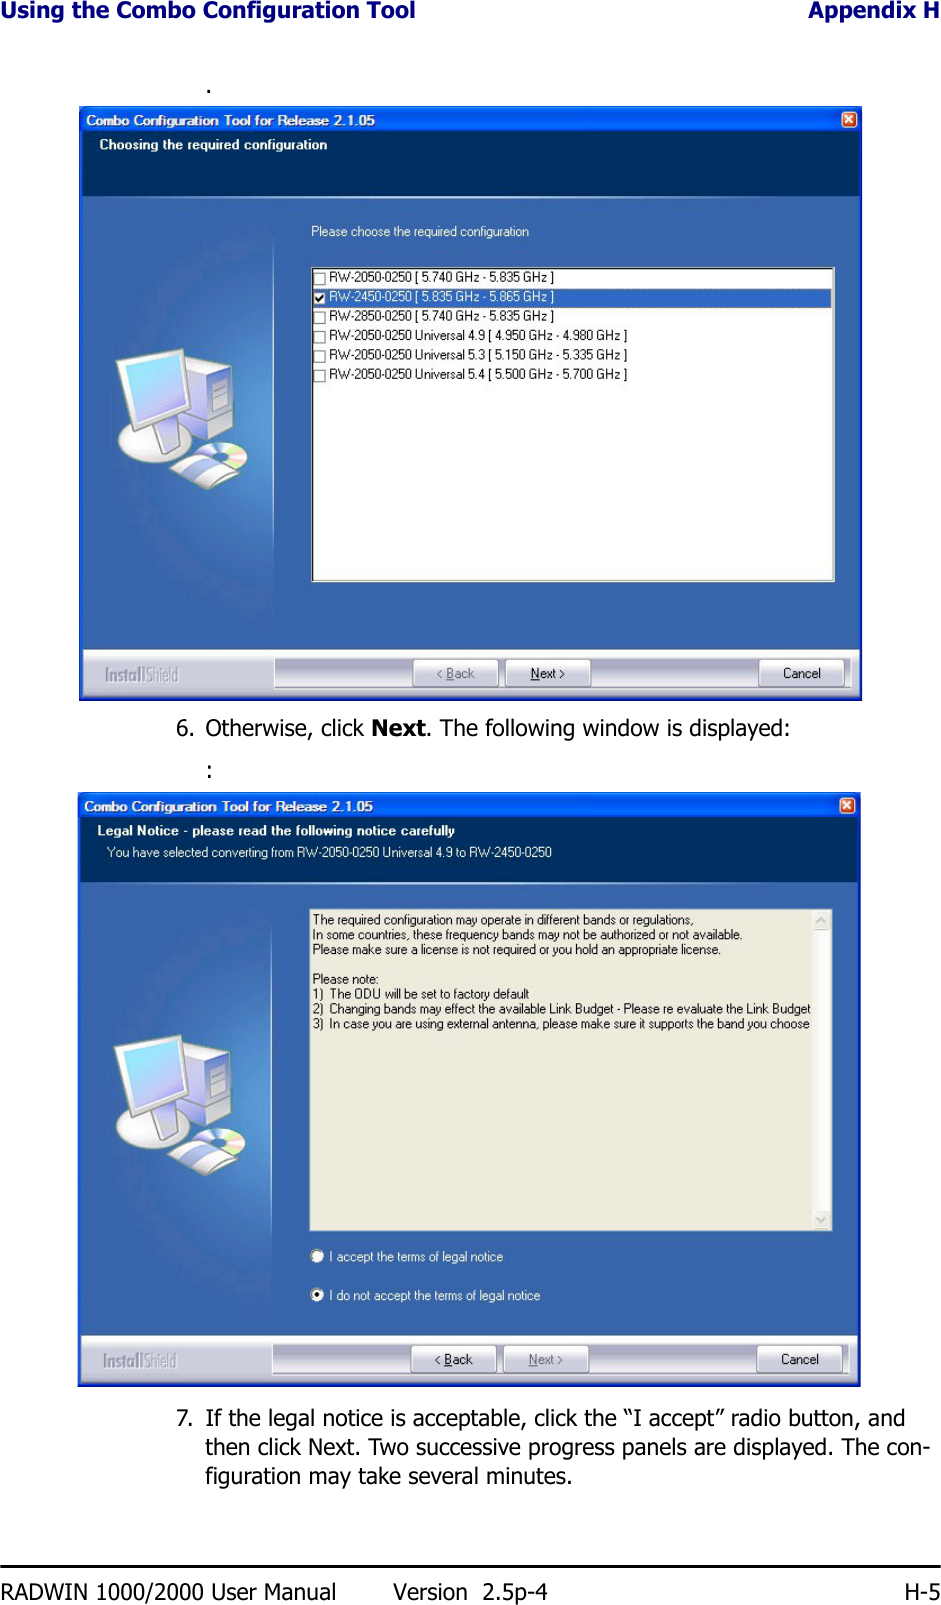 Using the Combo Configuration Tool Appendix HRADWIN 1000/2000 User Manual Version  2.5p-4 H-5.6. Otherwise, click Next. The following window is displayed::7. If the legal notice is acceptable, click the “I accept” radio button, and then click Next. Two successive progress panels are displayed. The con-figuration may take several minutes.